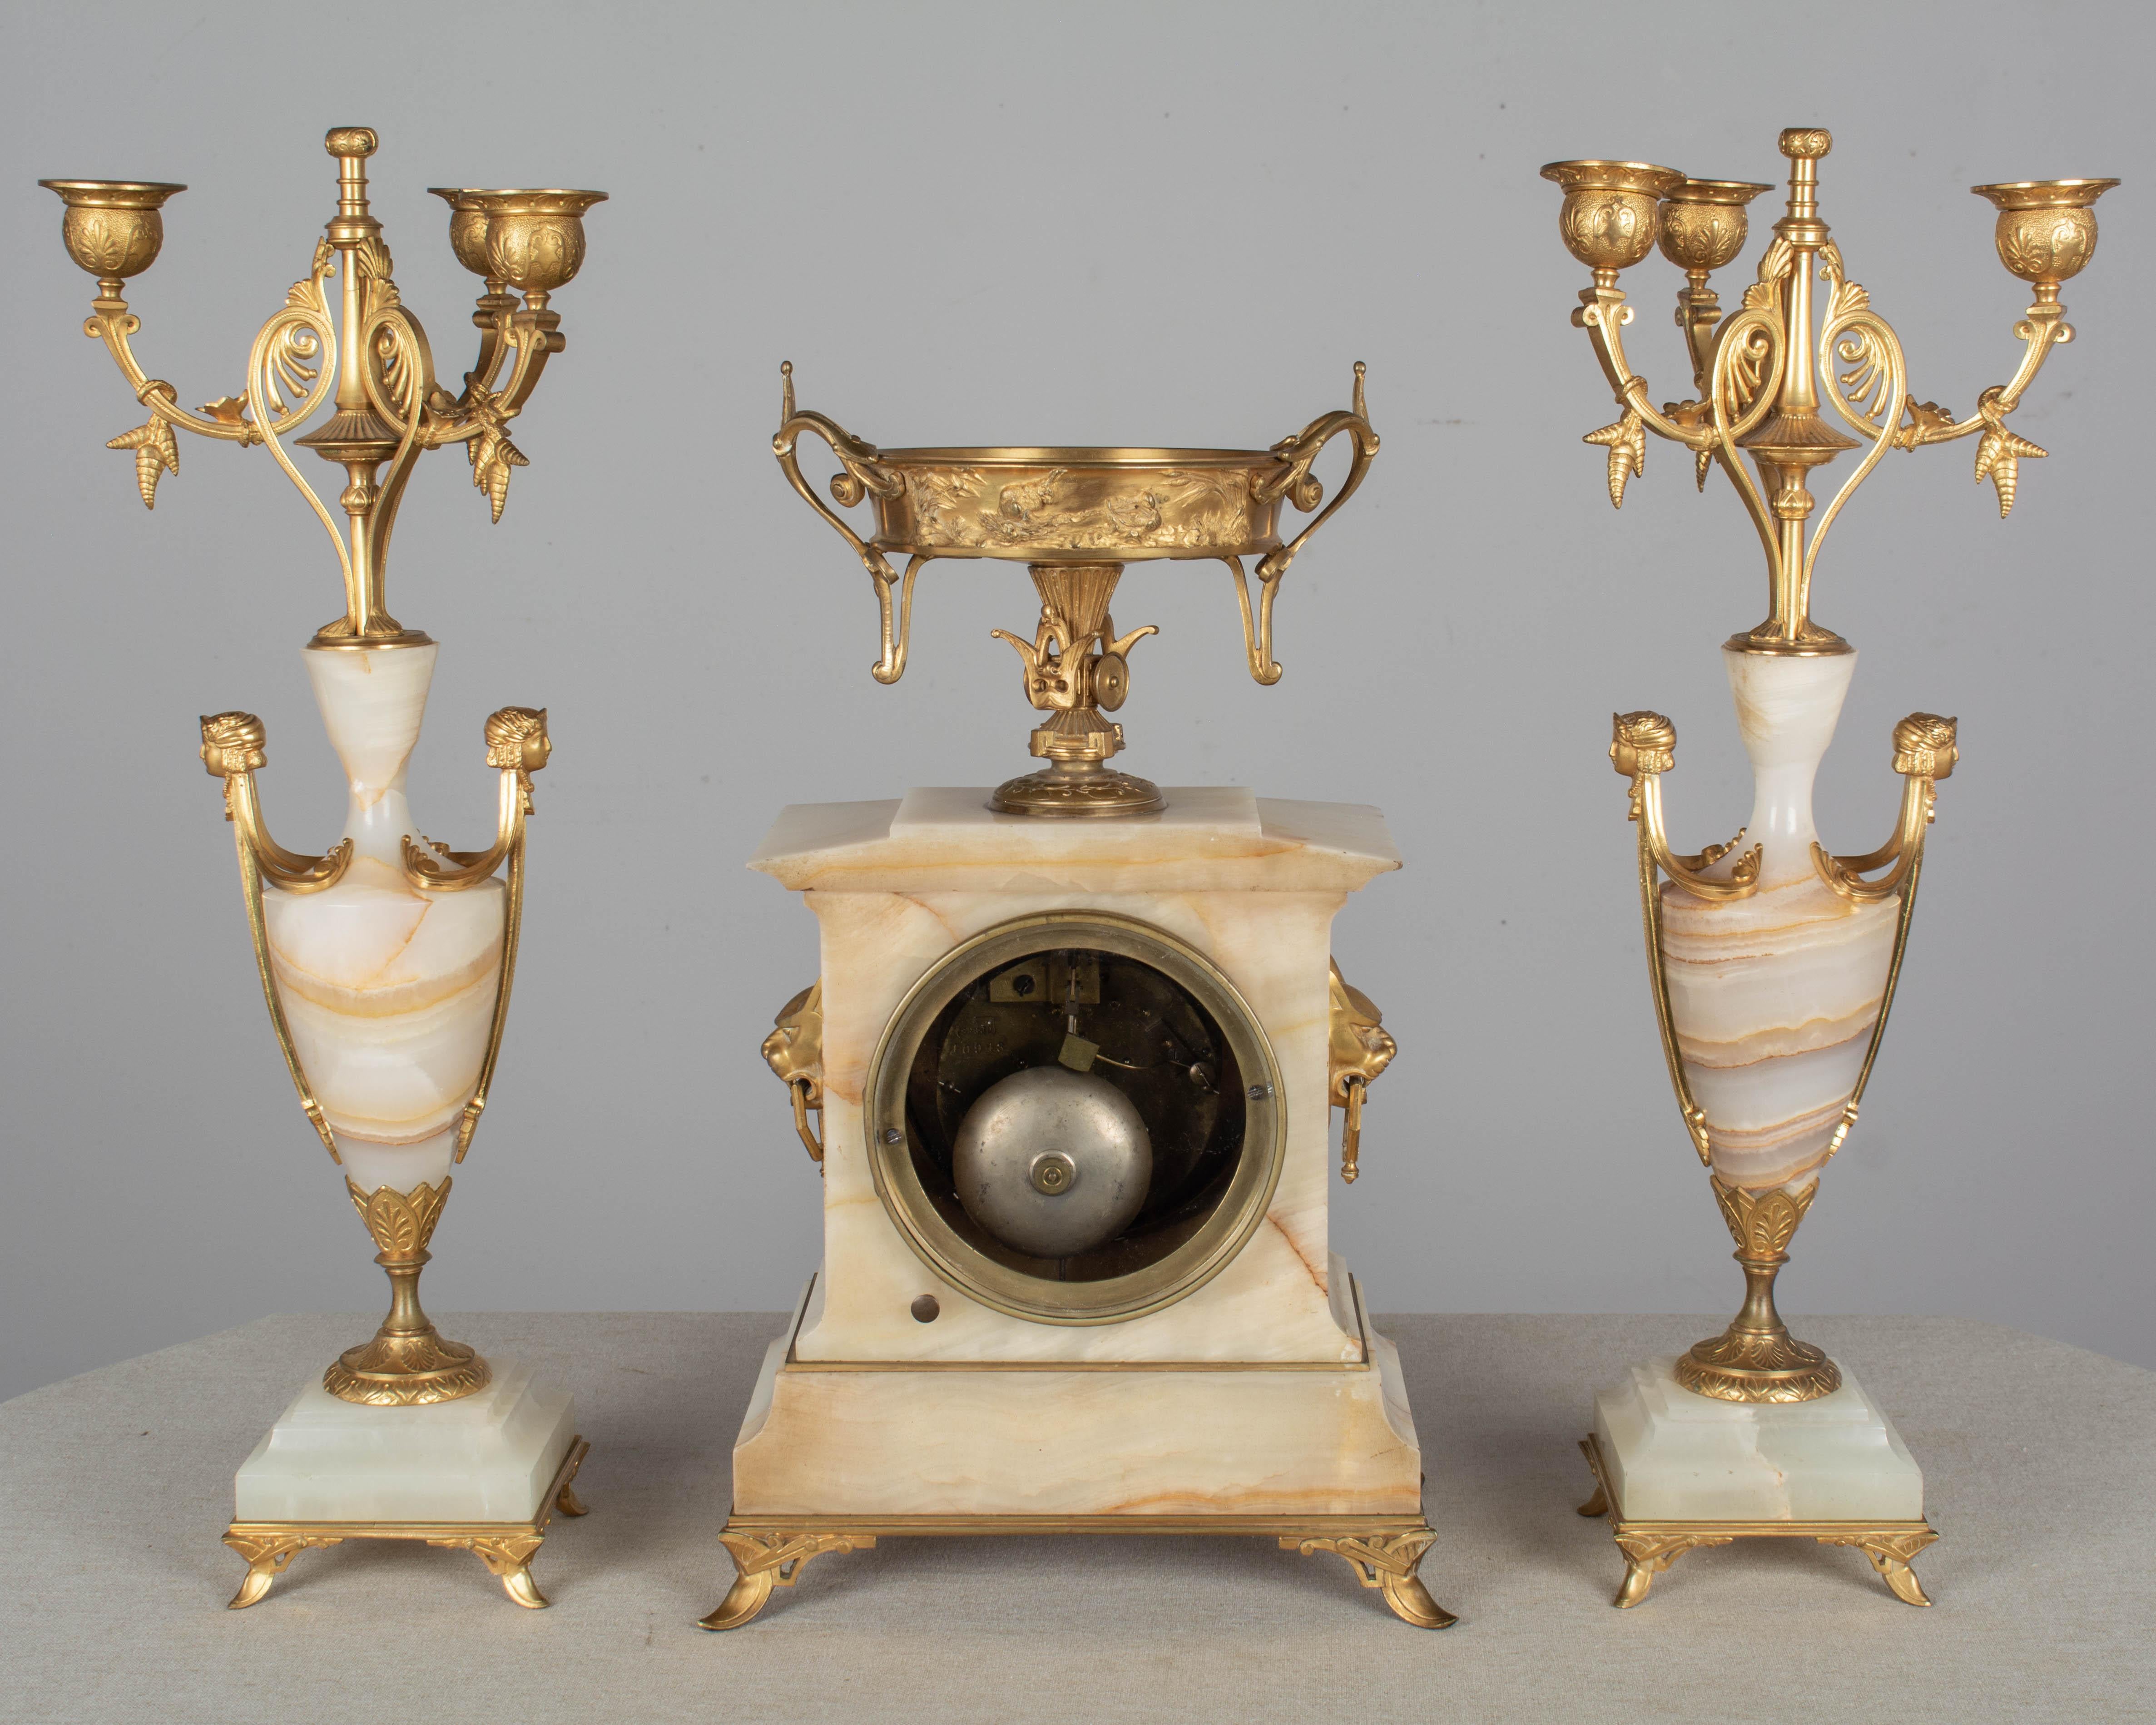 A French Art Deco three-piece mantel garniture consisting of a clock and a pair of three-light candelabras. Onyx and bronze doré with fine casting and bright gilt. Clock face has name of maker: Oudin, Marseille. In working condition and striking on